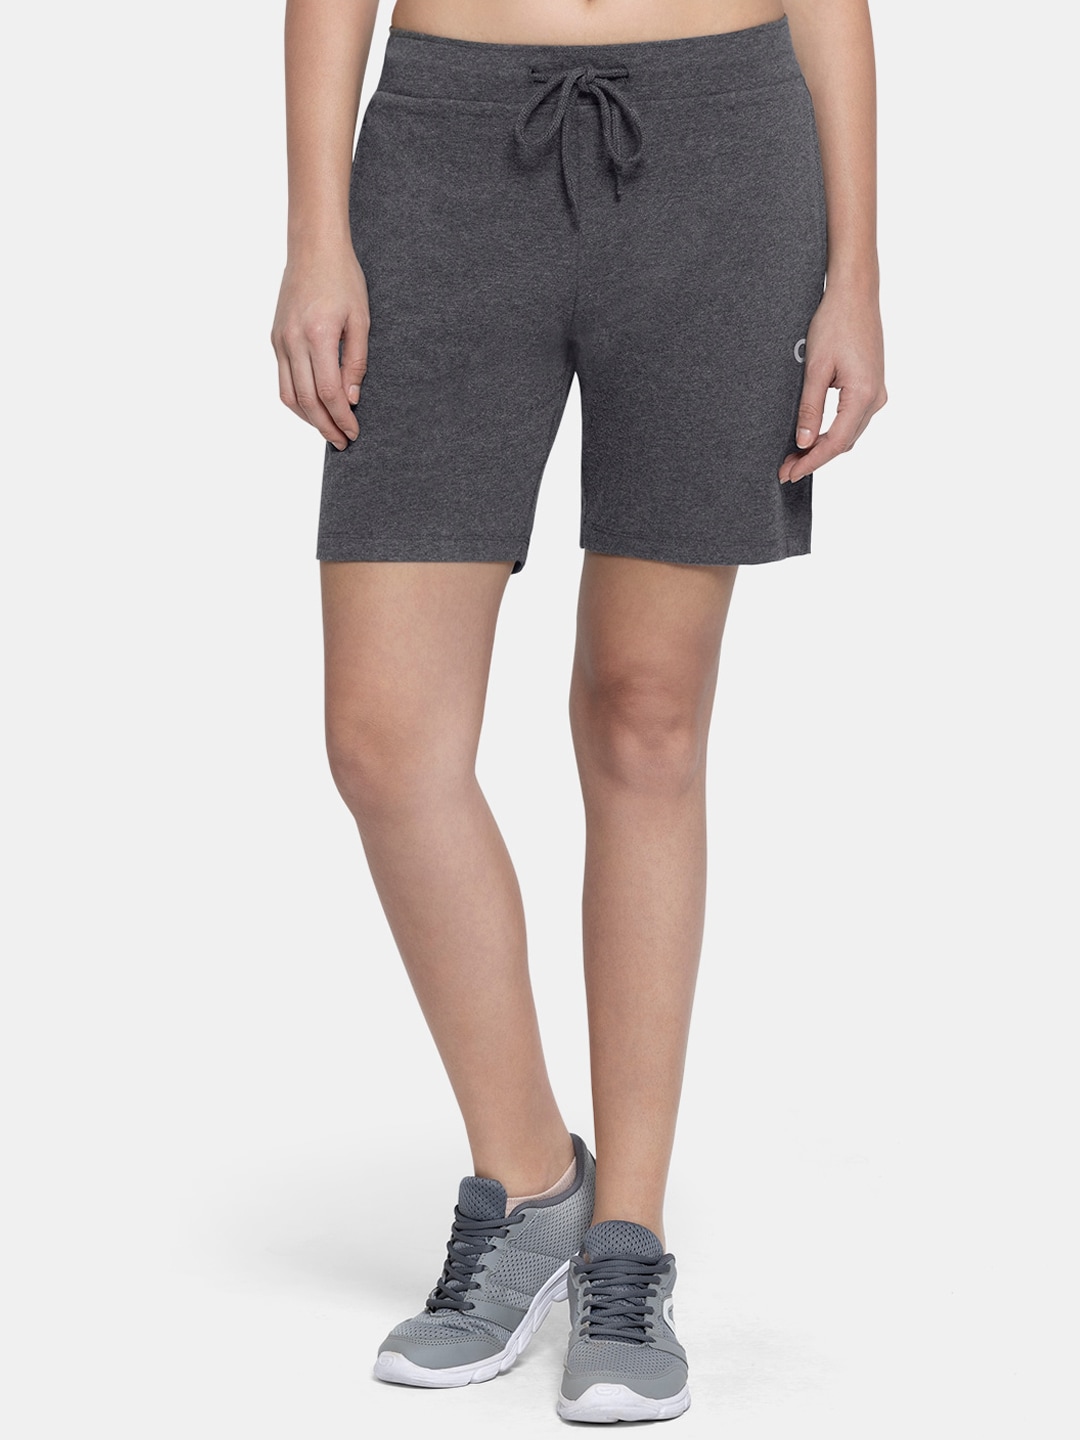 Amante Women Grey Low-Rise Running Sports Shorts Price in India